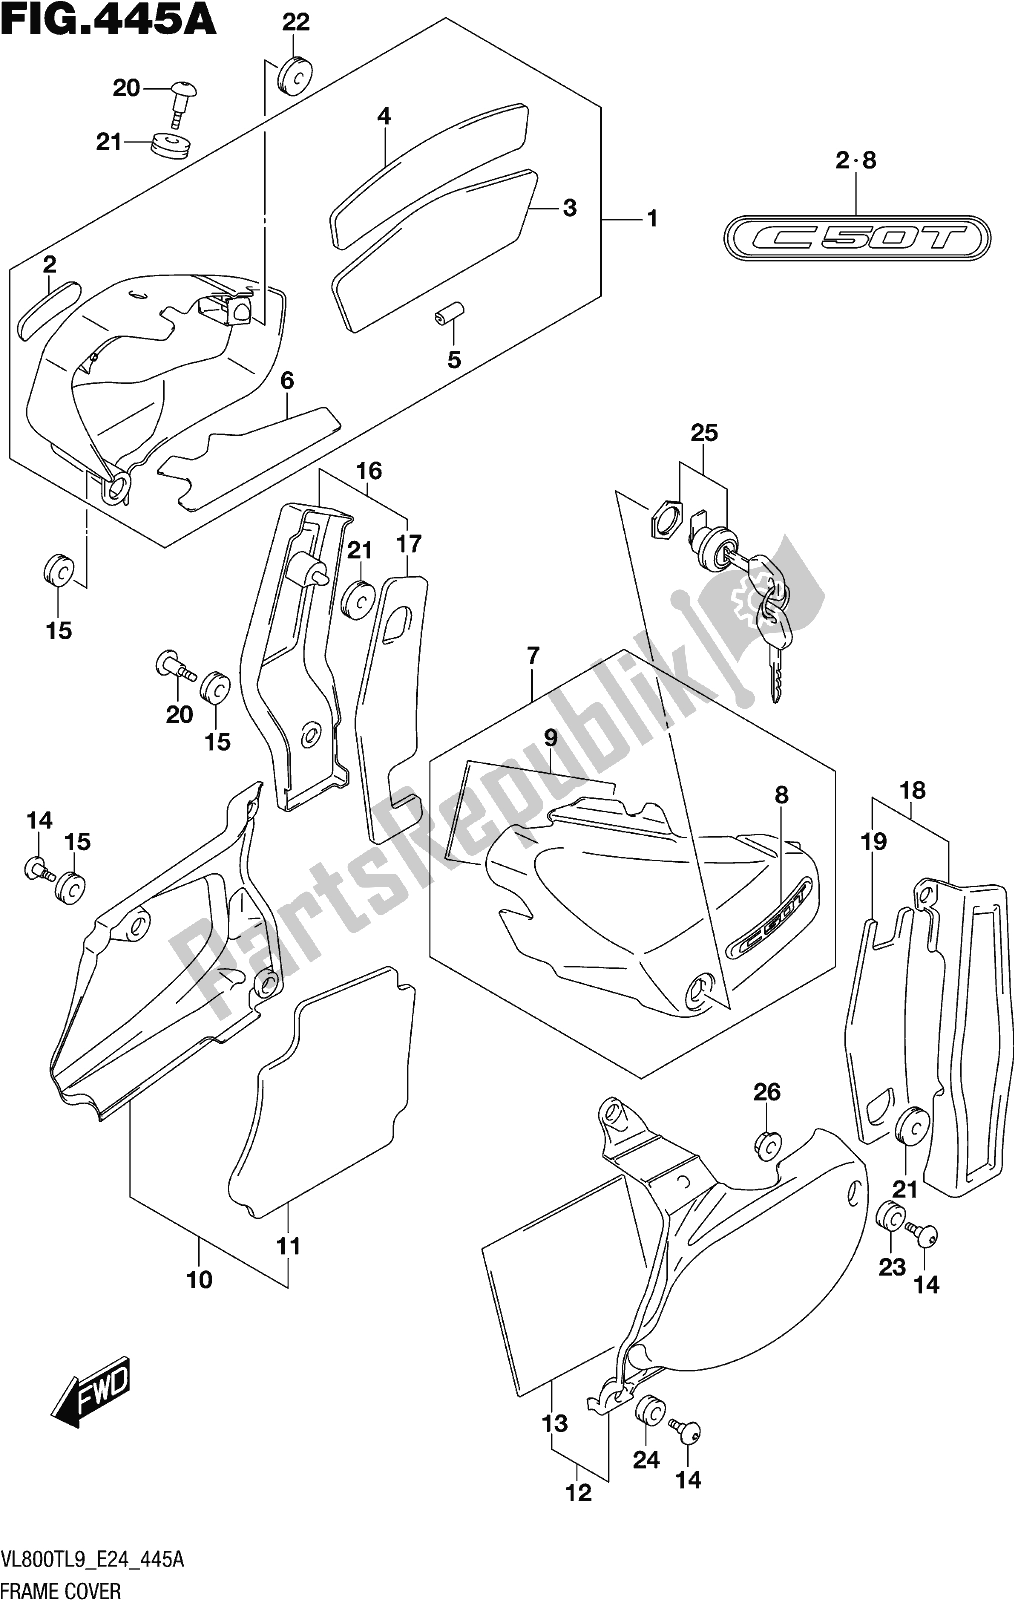 All parts for the Fig. 445a Frame Cover of the Suzuki VL 800T 2019